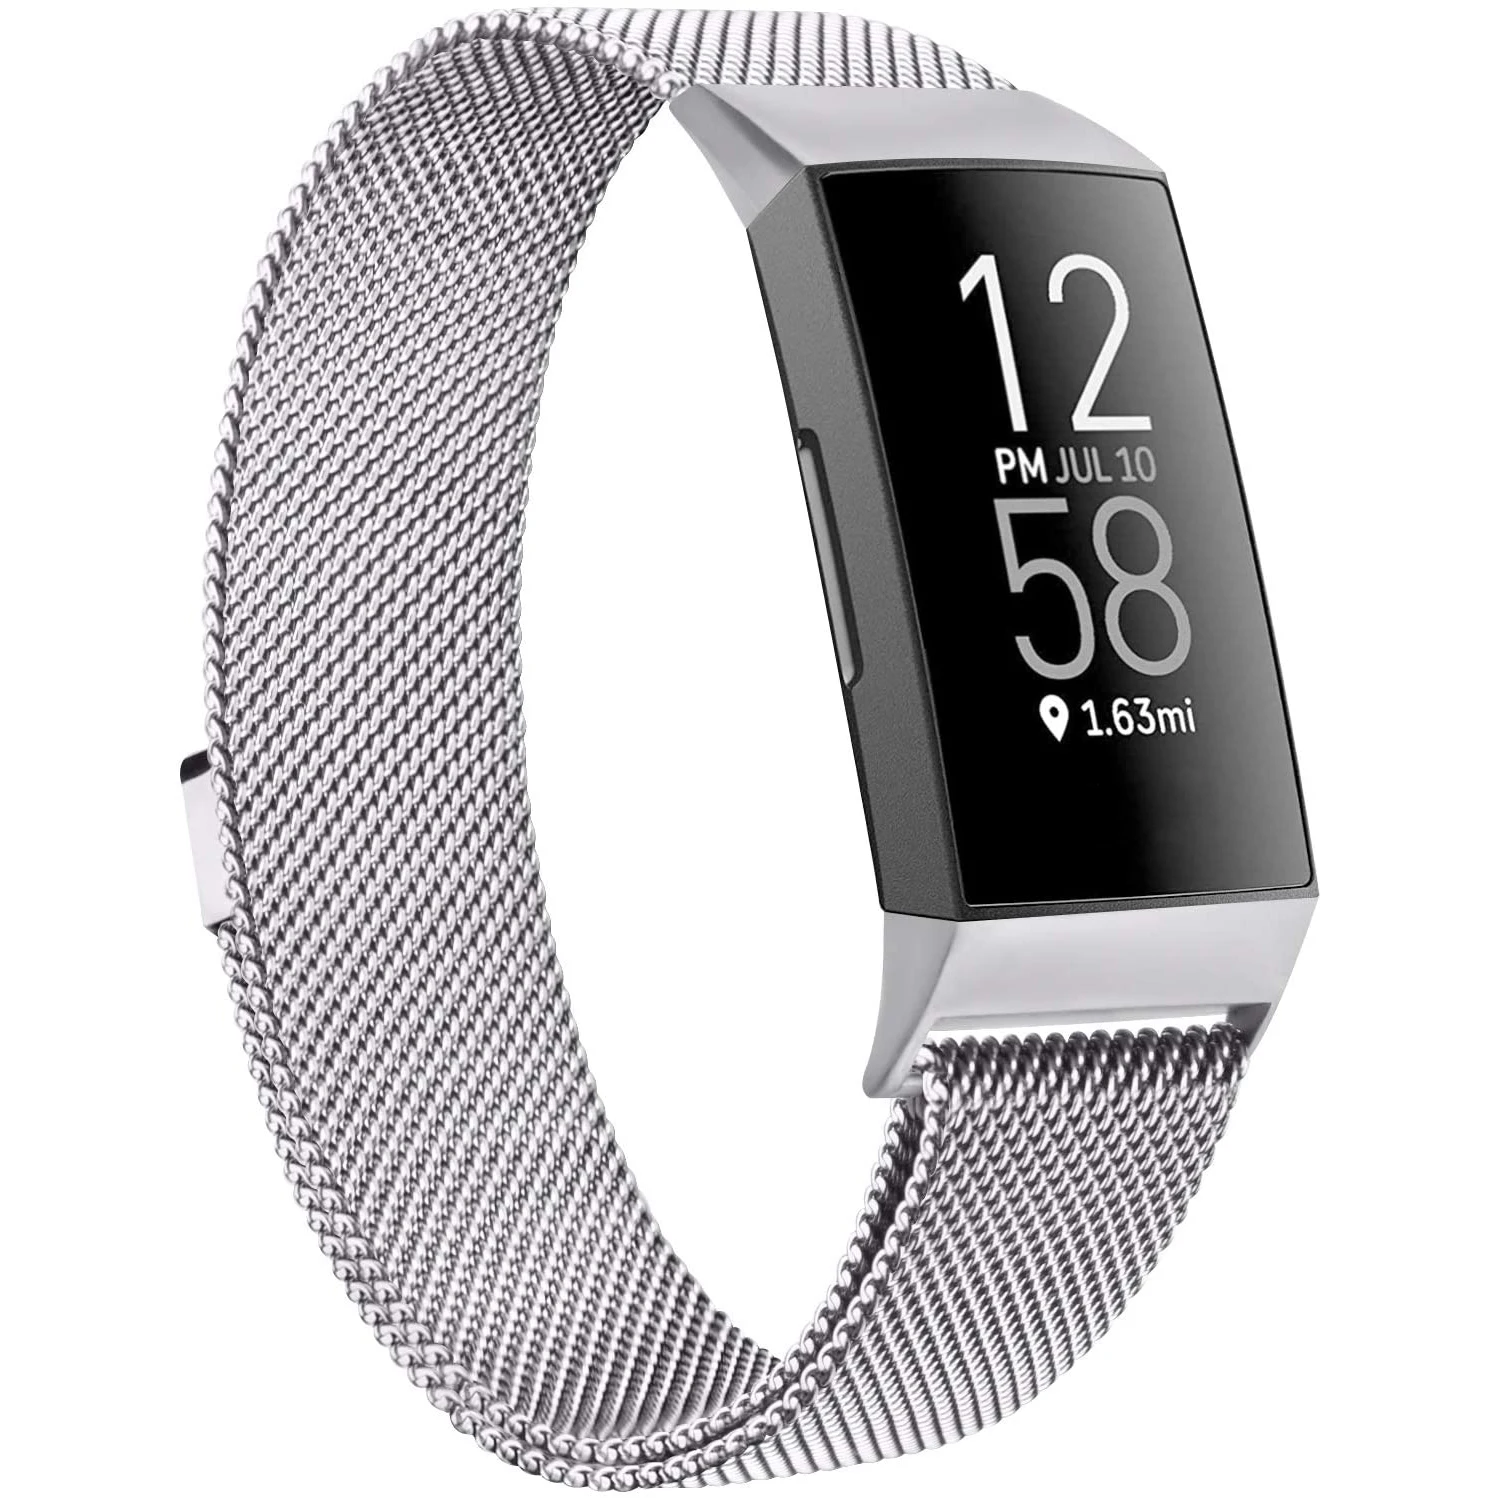 

Metal Replacement Strap Compatible with Fitbit Charge 3 Strap/Fitbit Charge 4 Strap, Adjustable Stainless Steel Wristband